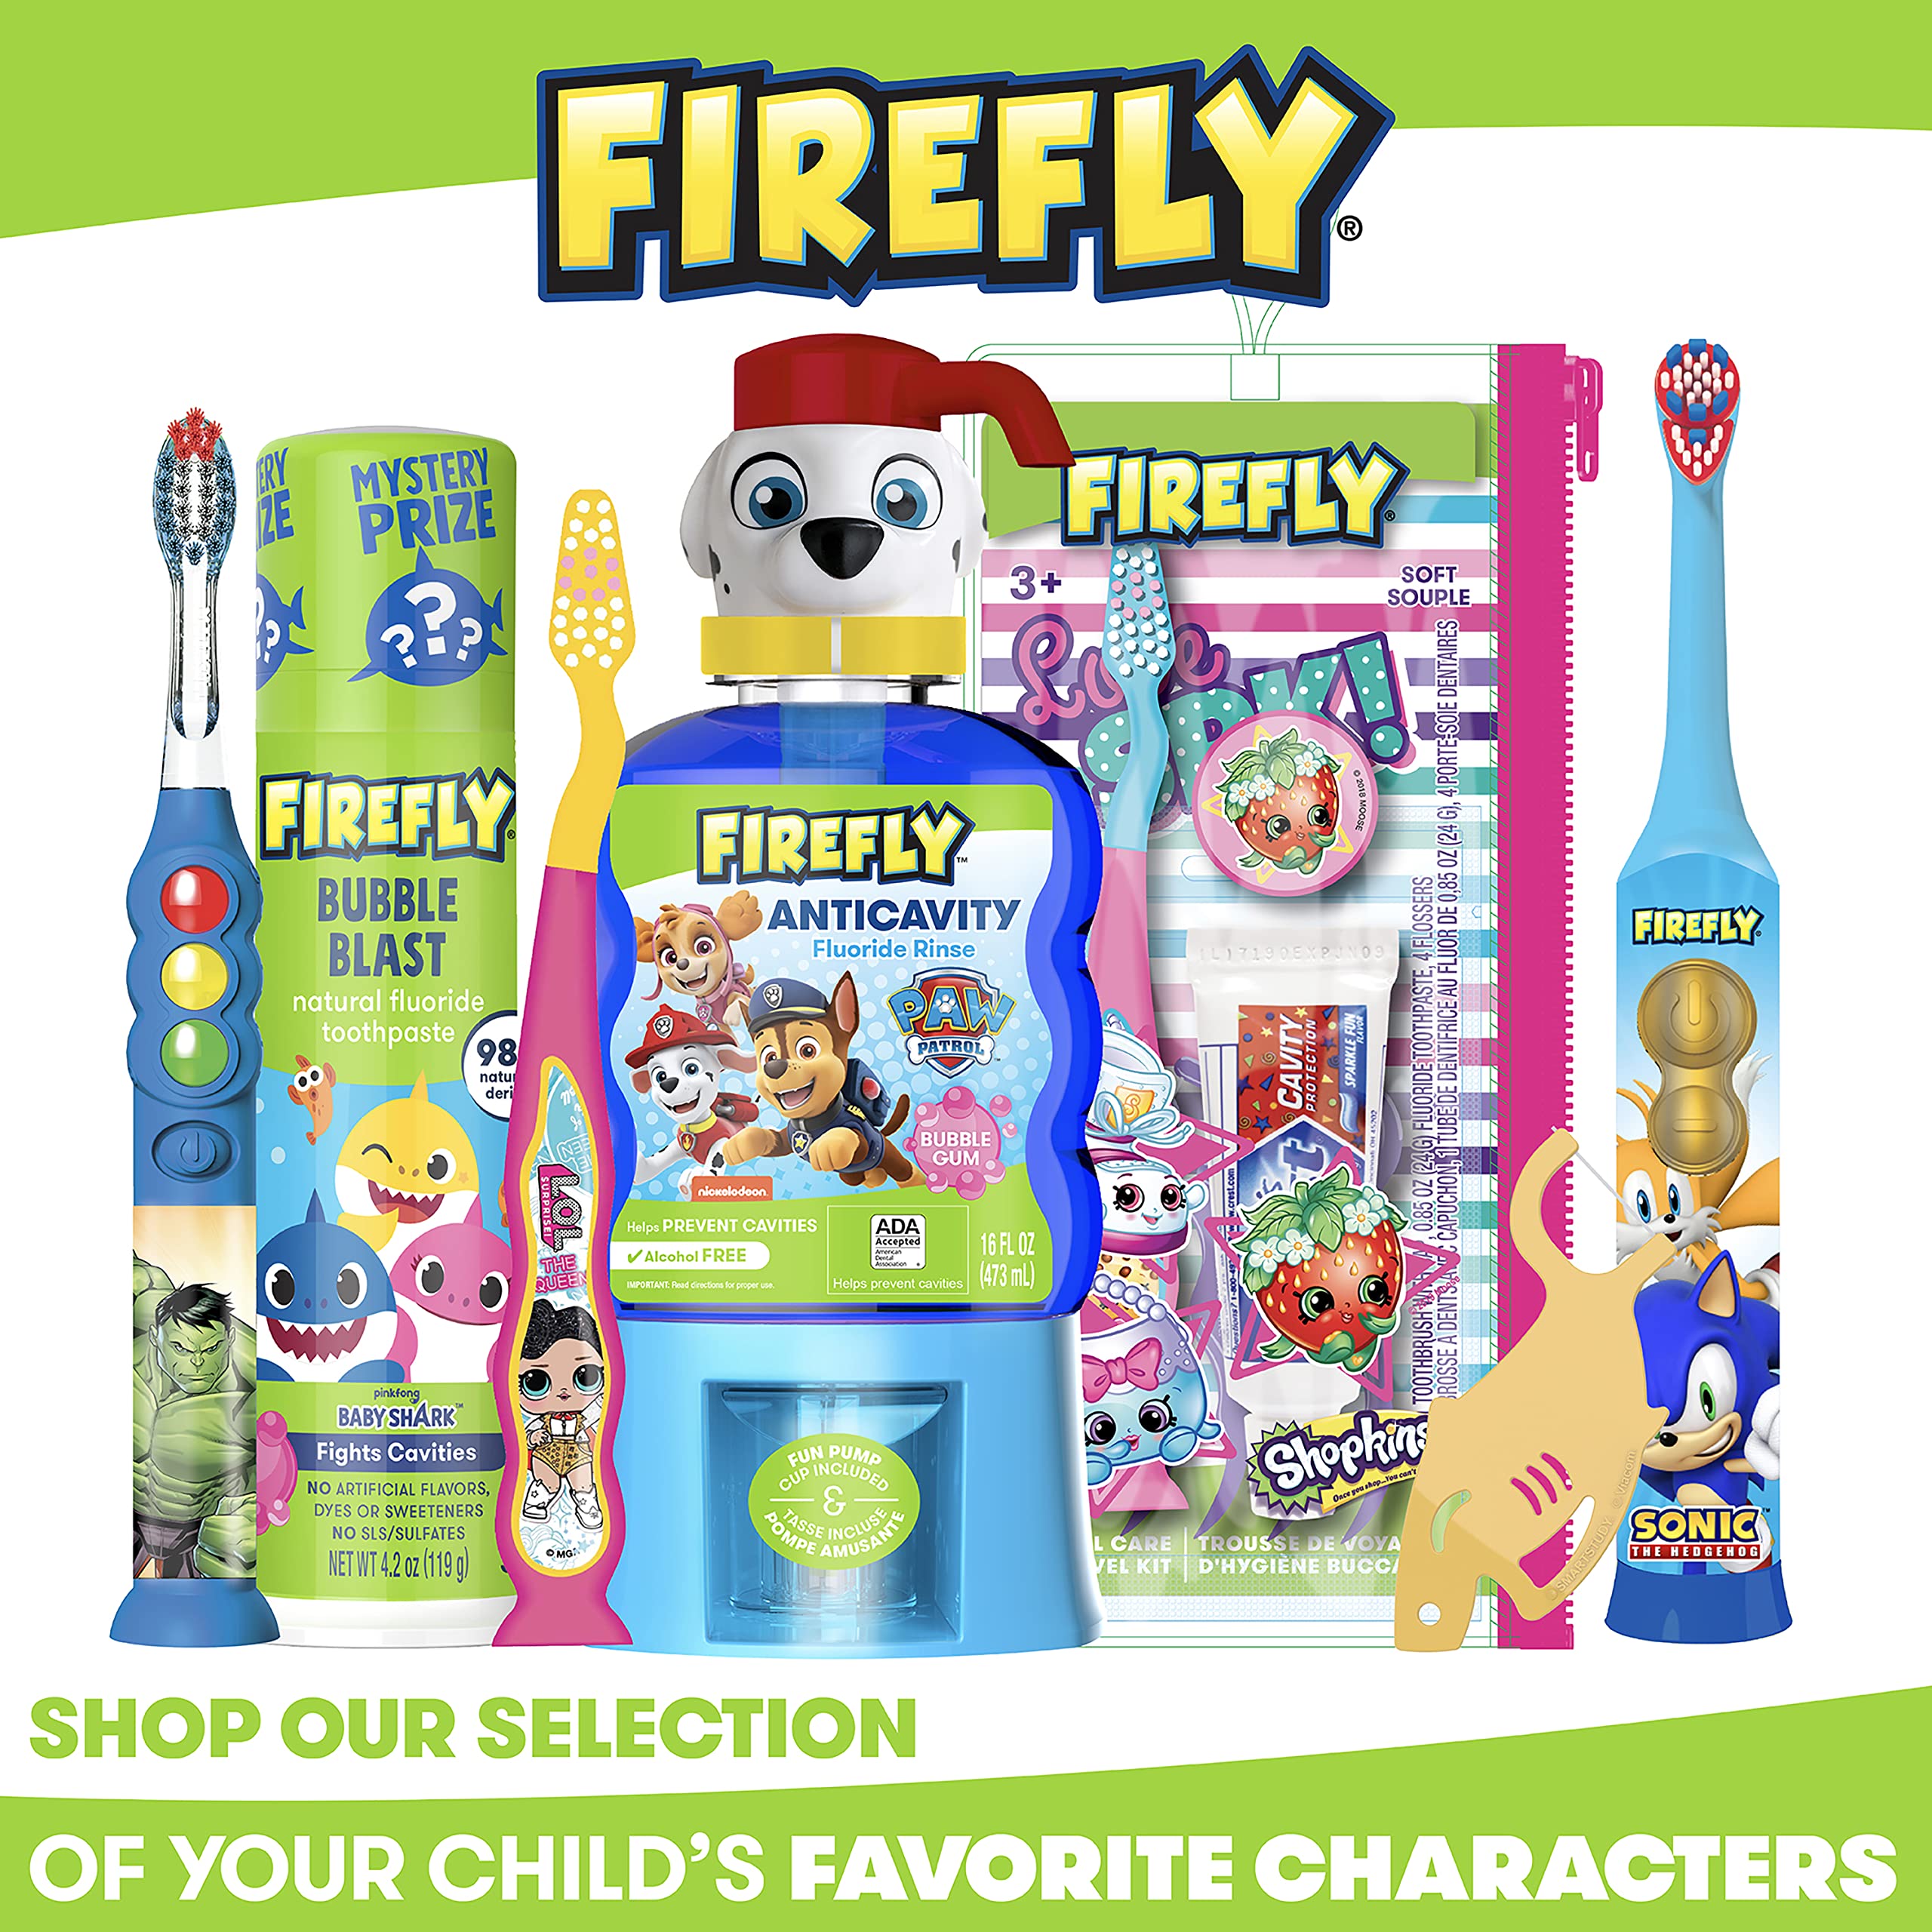 FIREFLY Clean N' Protect, Spongebob Squarepants Toothbrush with 3D hygienic Character Cover, Soft Compact Brush Head, Ergonomic Handles for Small Hands, Battery Included, Ages 3+, 1 Count